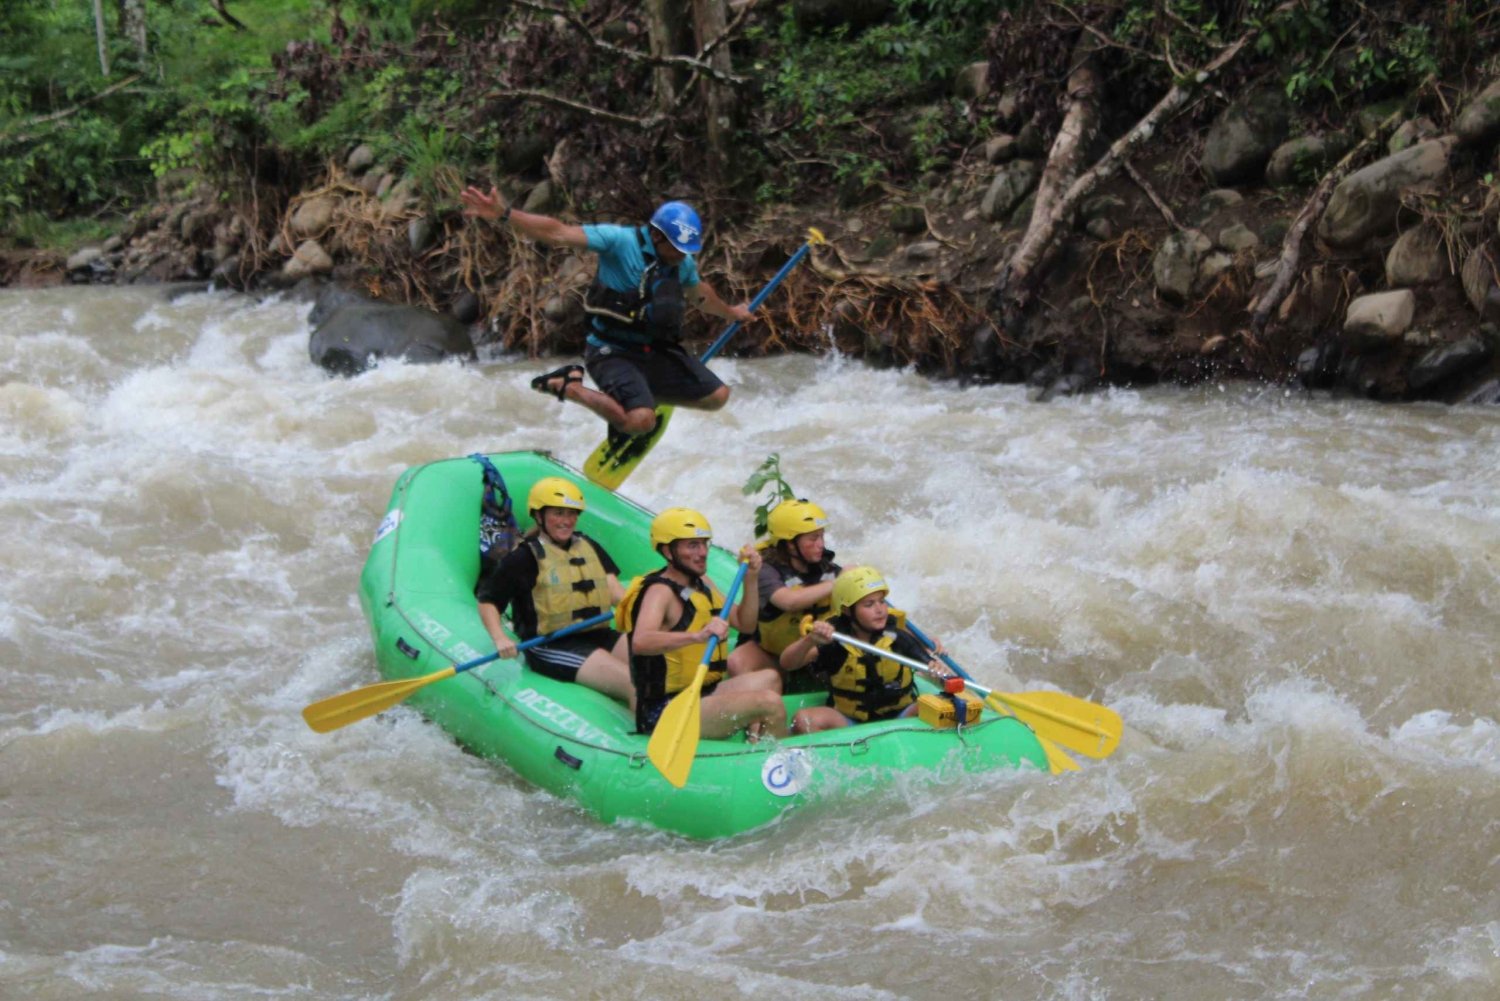 La Fortuna: Canyoning and River Rafting Tour with Lunch